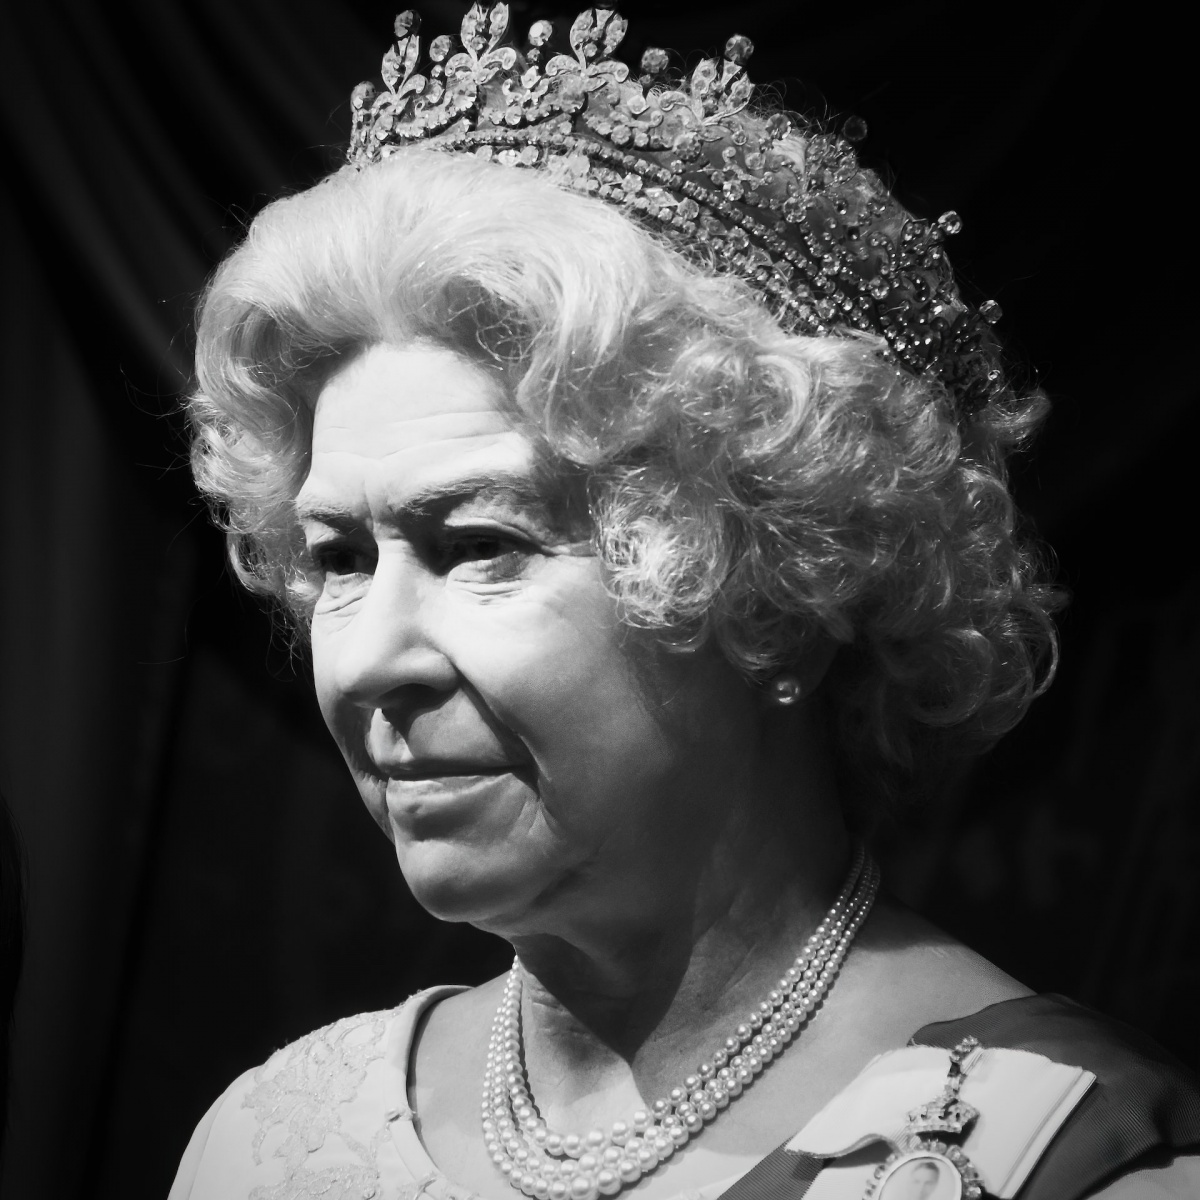 Scam Alert! Fake Microsoft Emails About Queen's Death Can Steal Your Confidential Information